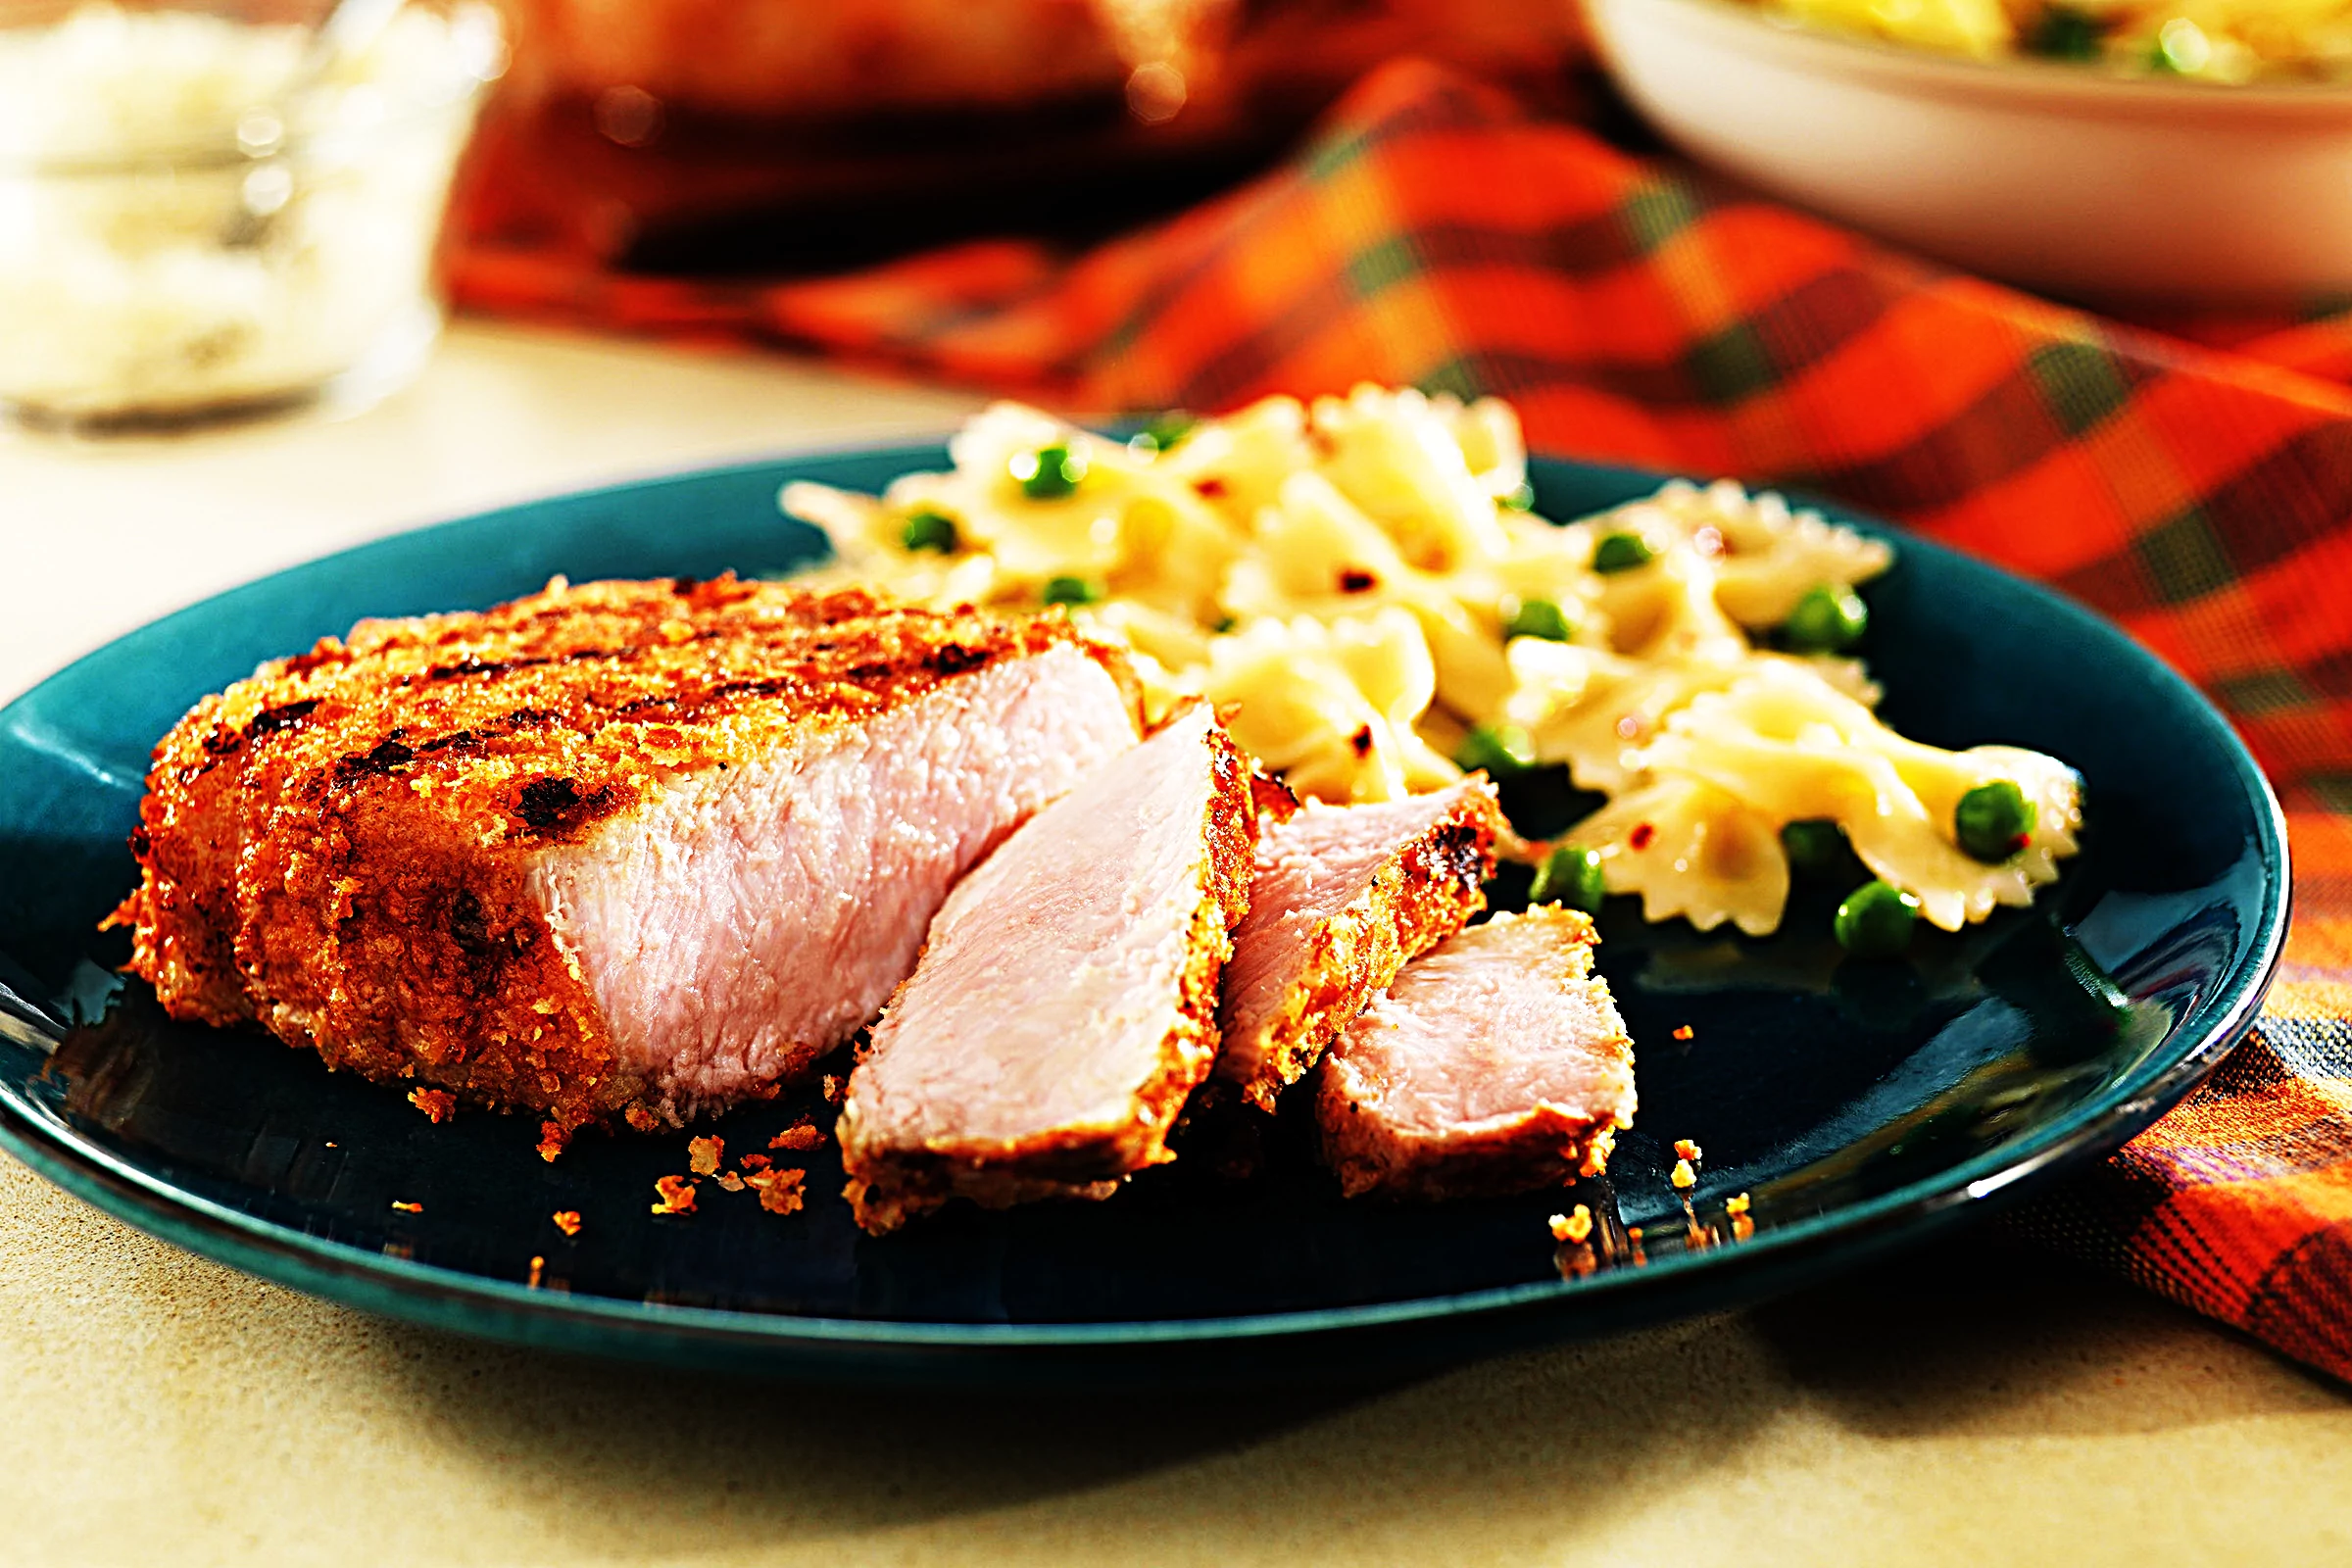 Stupid-Easy Recipe for Parmesan-Crusted New York Pork Chops (#1 Top-Rated)